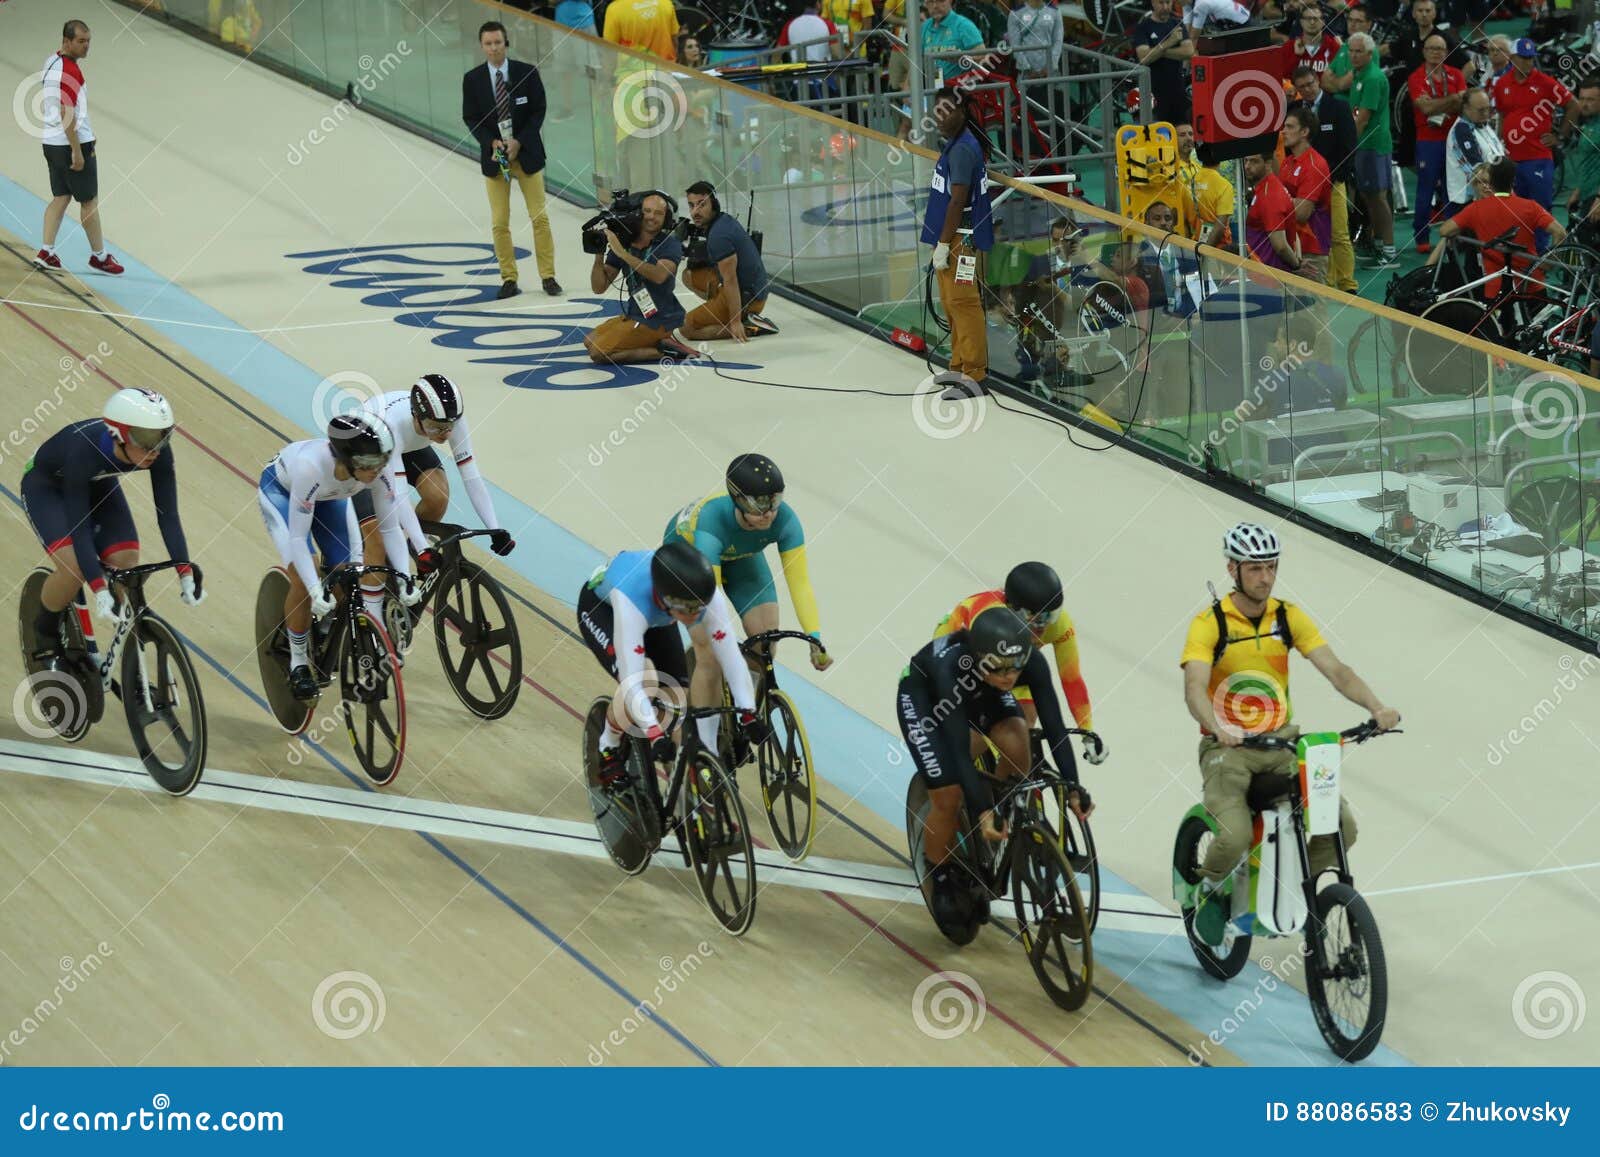 Cyclists In Action During Rio 2016 Olympics Women S Keirin First Round Heat 3 At The Rio Olympic Velodrome Editorial Stock Photo Image Of Center Famous 88086583